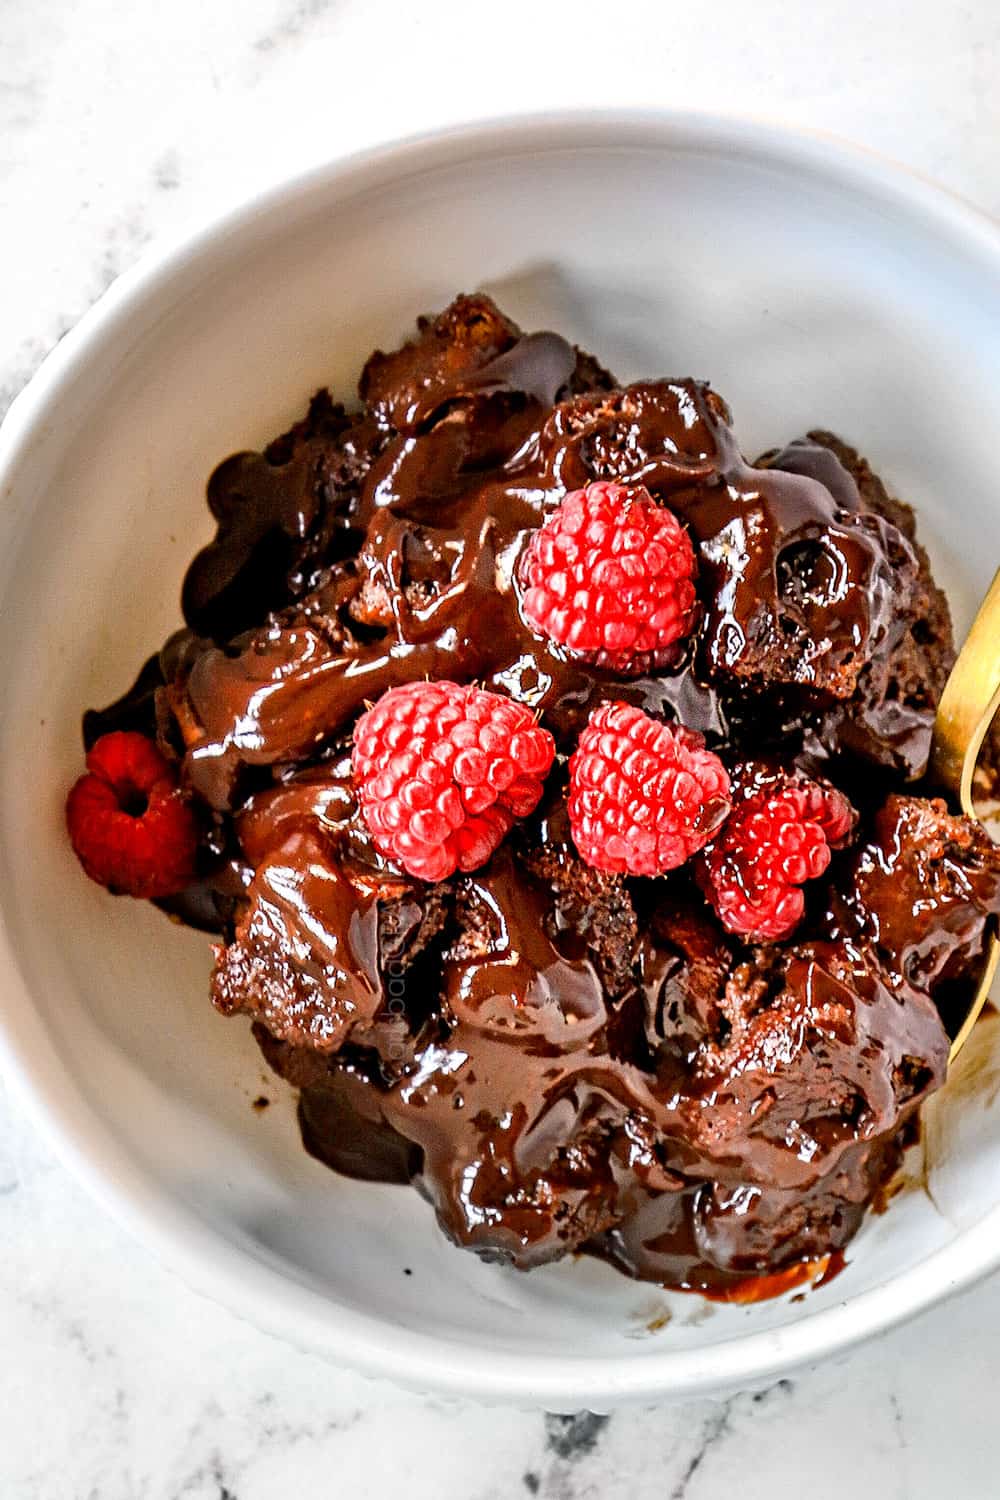 top view of chocolate bread pudding recipe in a white bowl garnished with raspberries